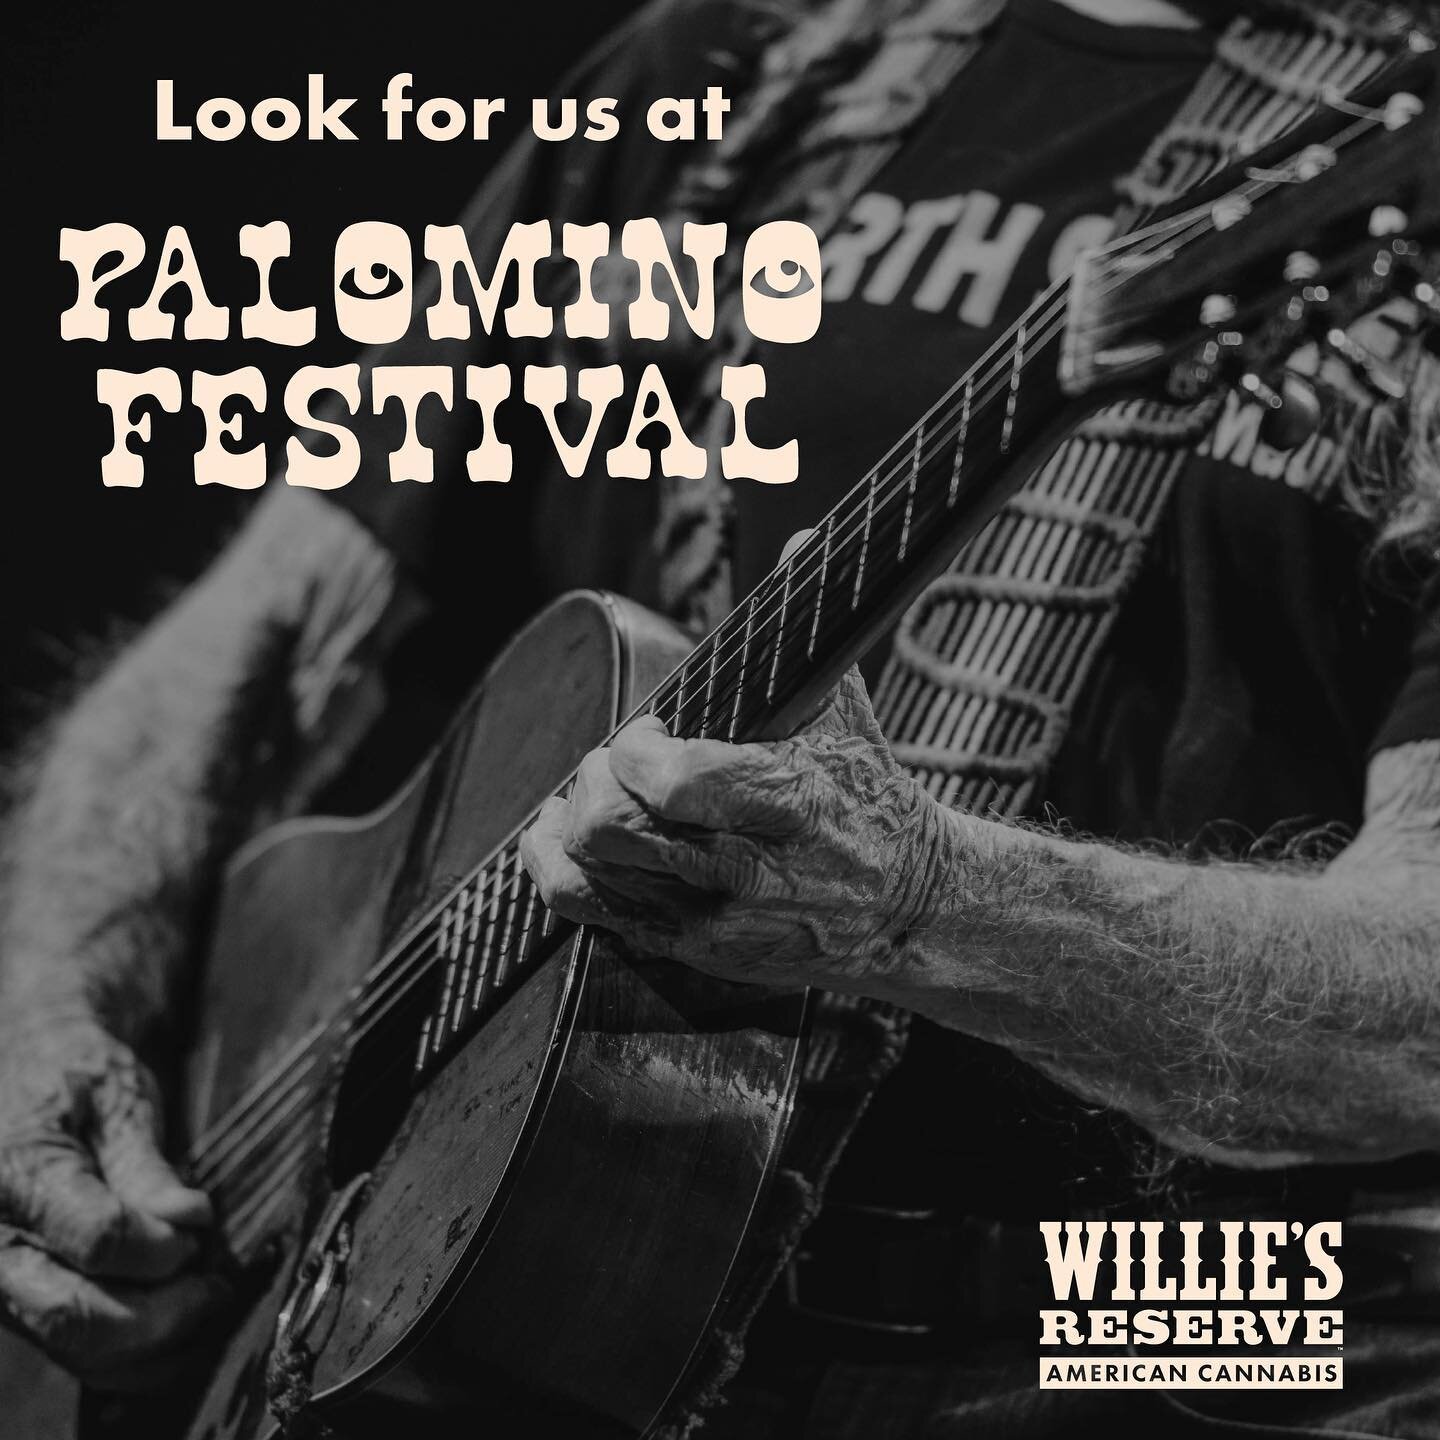 Find us this Saturday at @palominopasadena music festival in the merch booth! We will have a few tees and other fun items for our friends living or visiting California this weekend! Willie will be joining his friends Kacey, Orville, and many others s